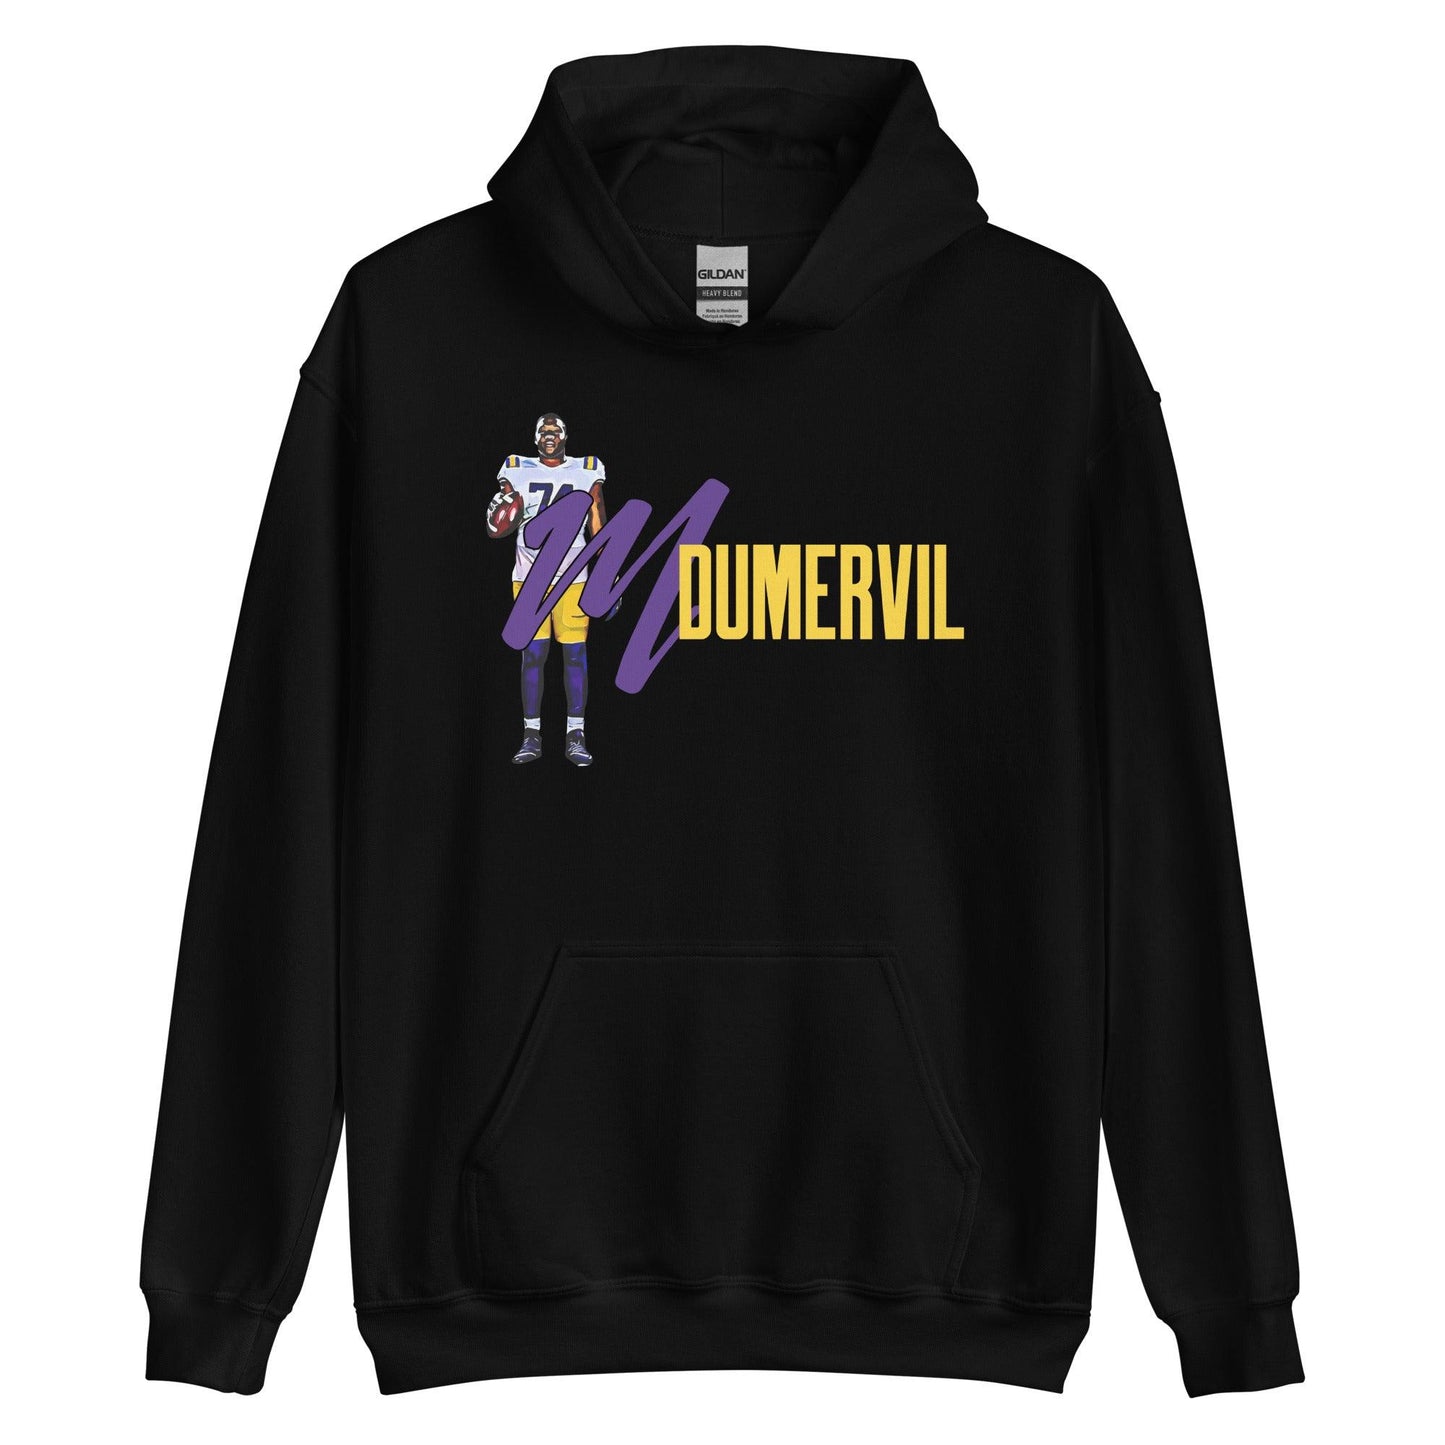 Marcus Dumervil "Stand Strong" Hoodie - Fan Arch